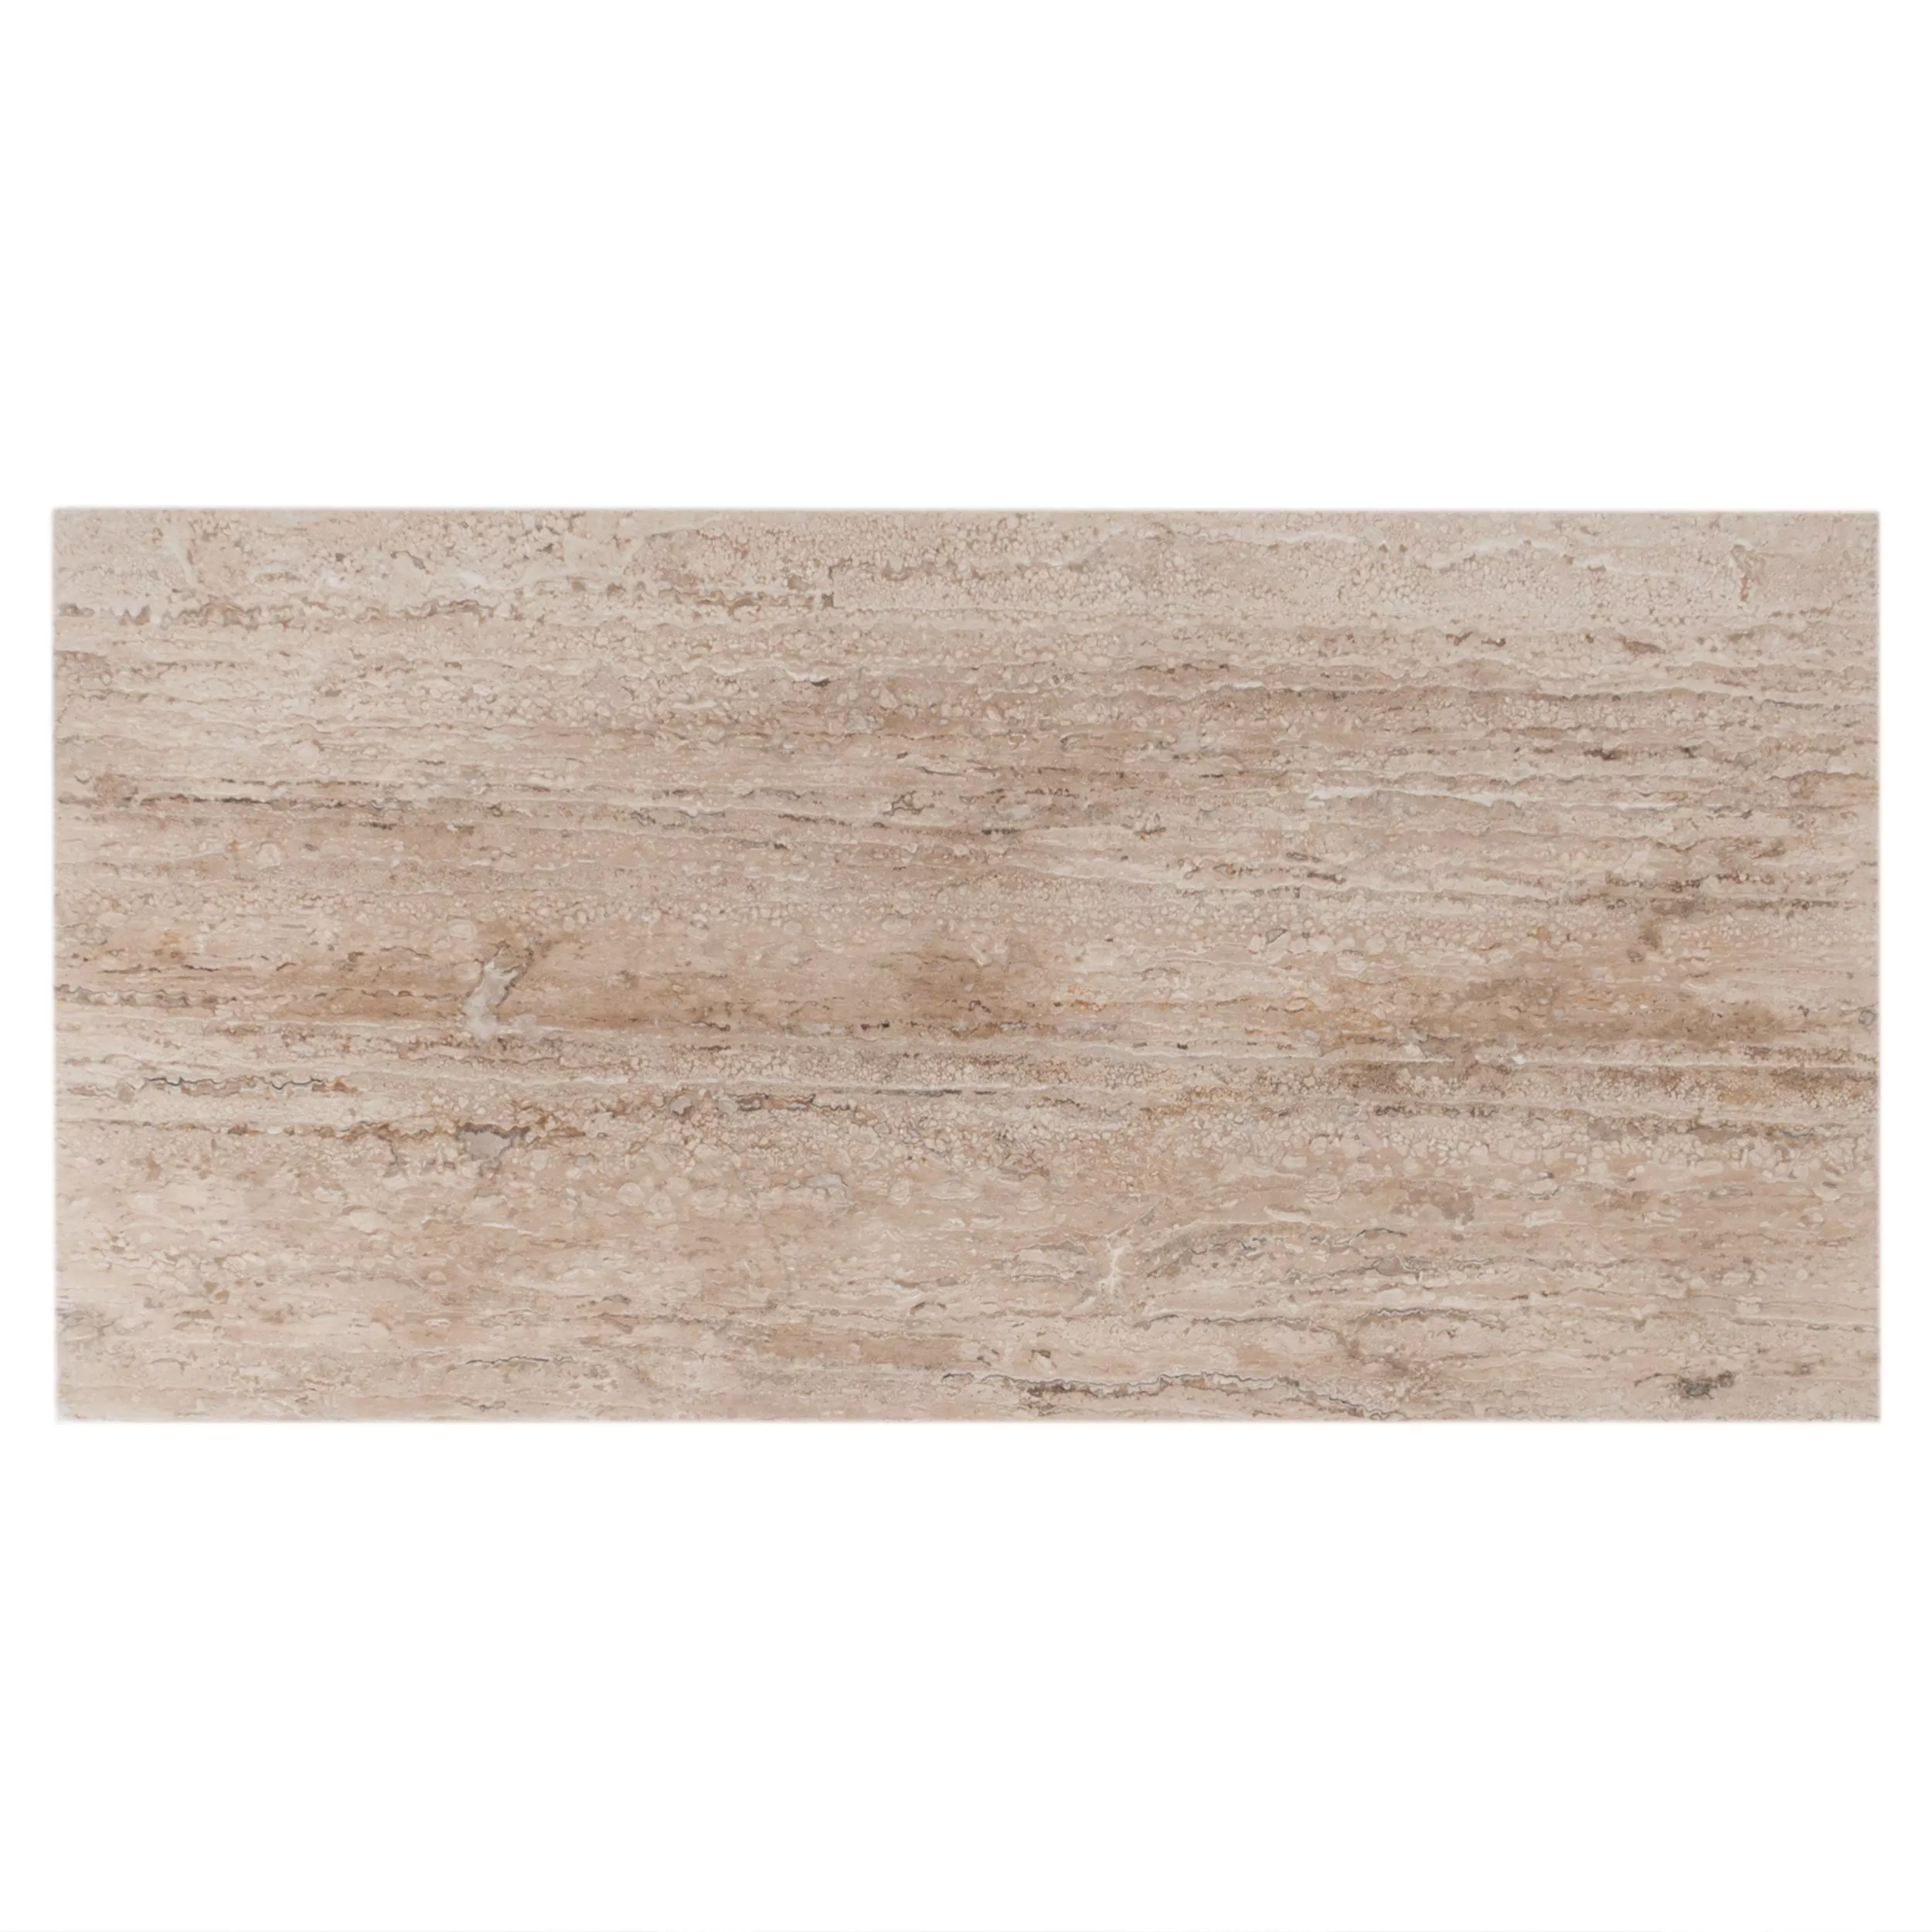 Rumi Brushed Travertine Tile | Floor and Decor